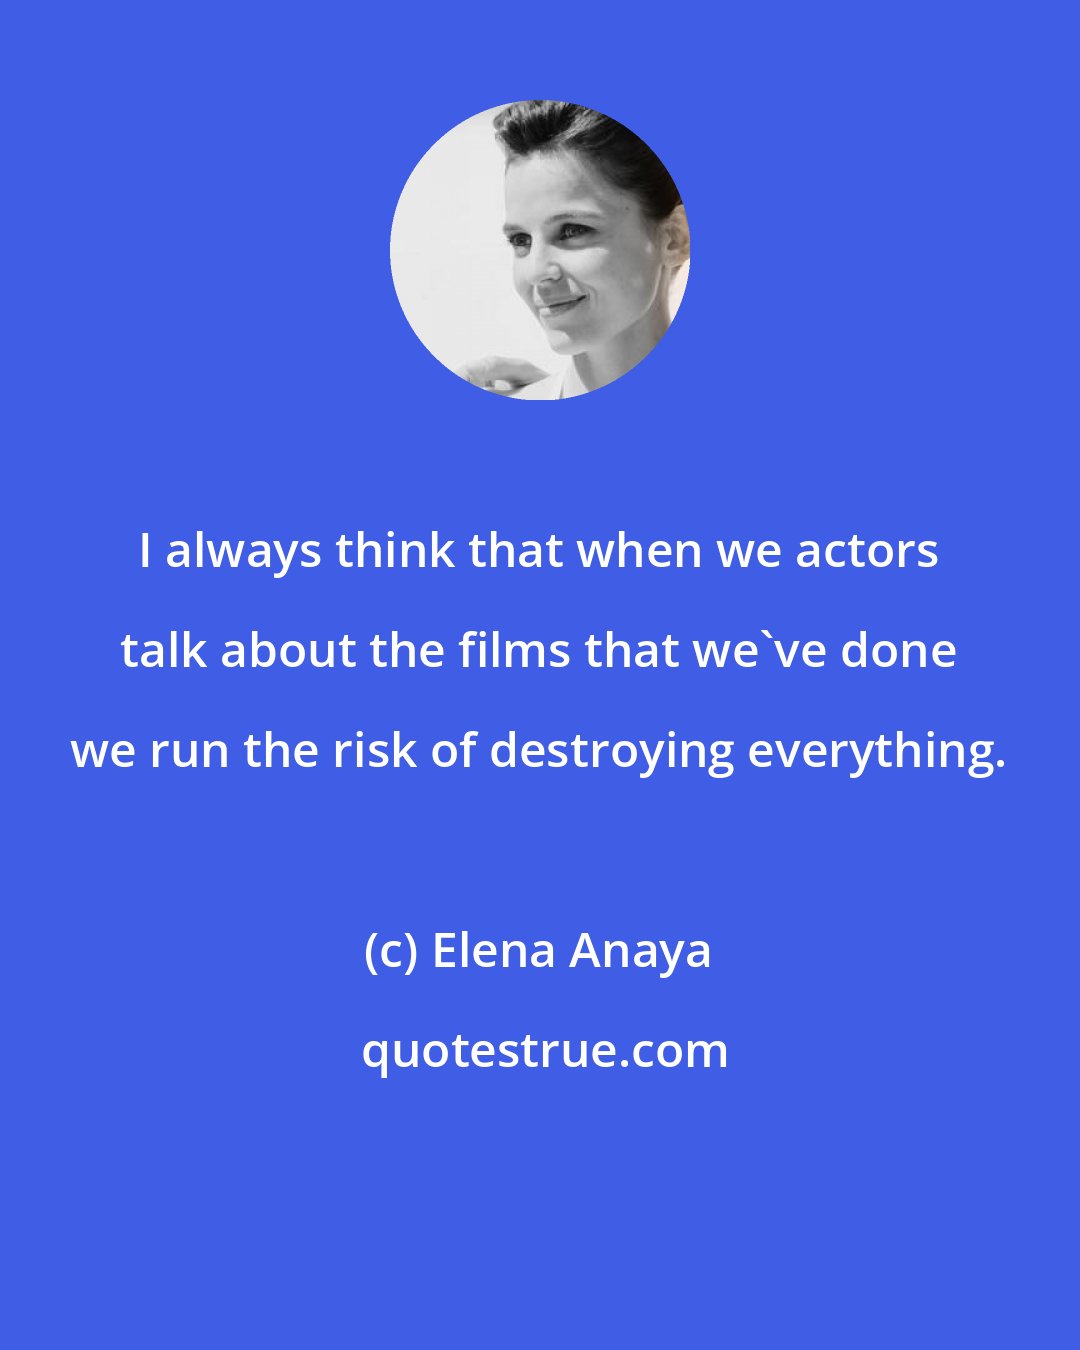 Elena Anaya: I always think that when we actors talk about the films that we've done we run the risk of destroying everything.